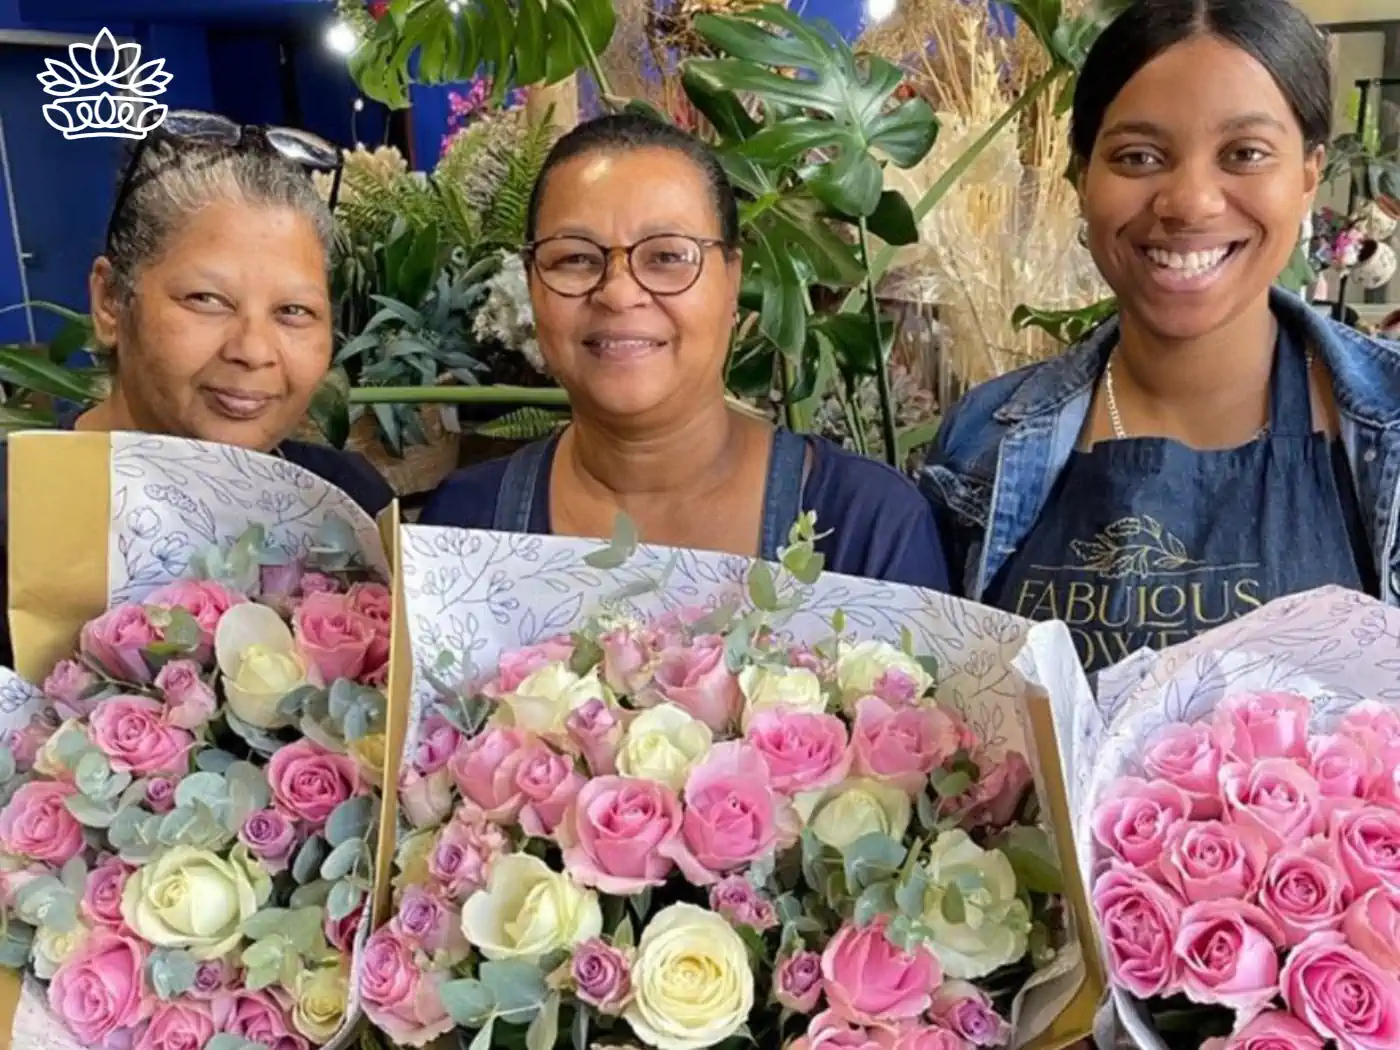 Three joyful florists holding lush bouquets of pink and cream roses surrounded by eucalyptus leaves, a bespoke creation from Fabulous Flowers and Gifts.